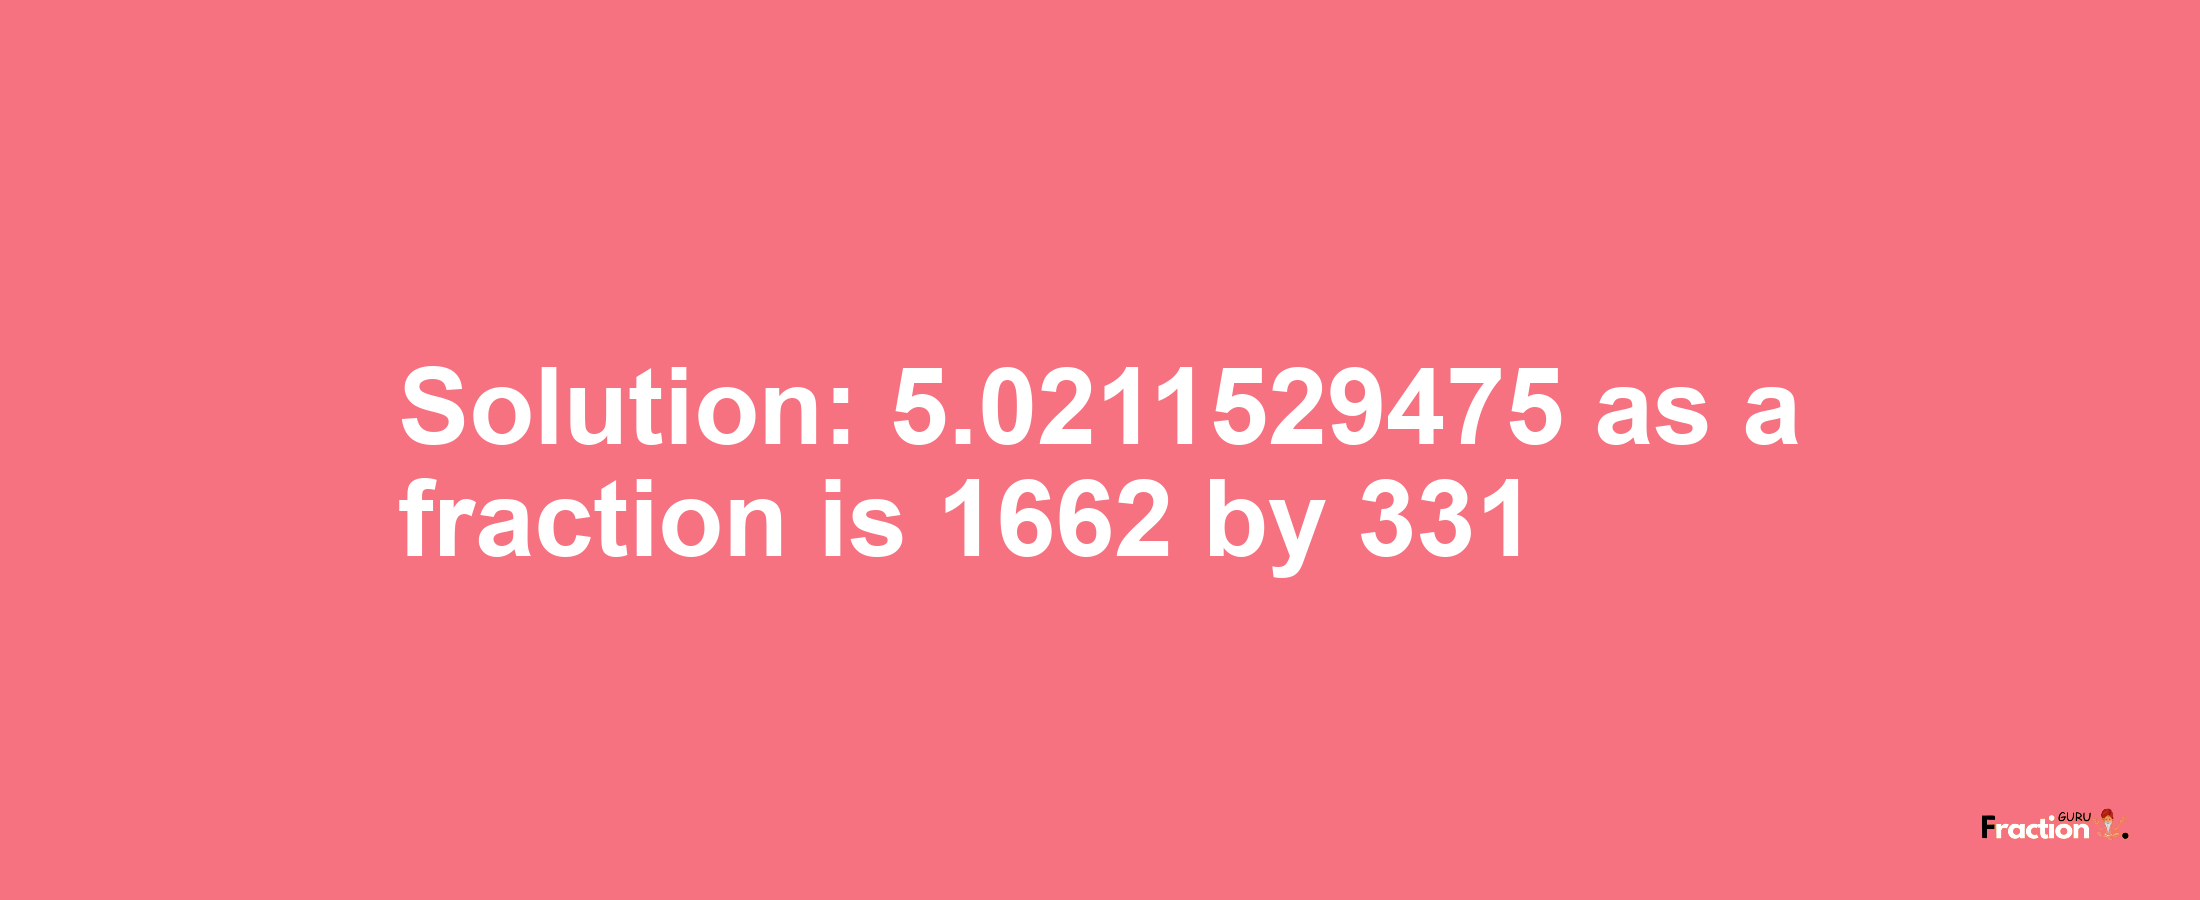 Solution:5.0211529475 as a fraction is 1662/331